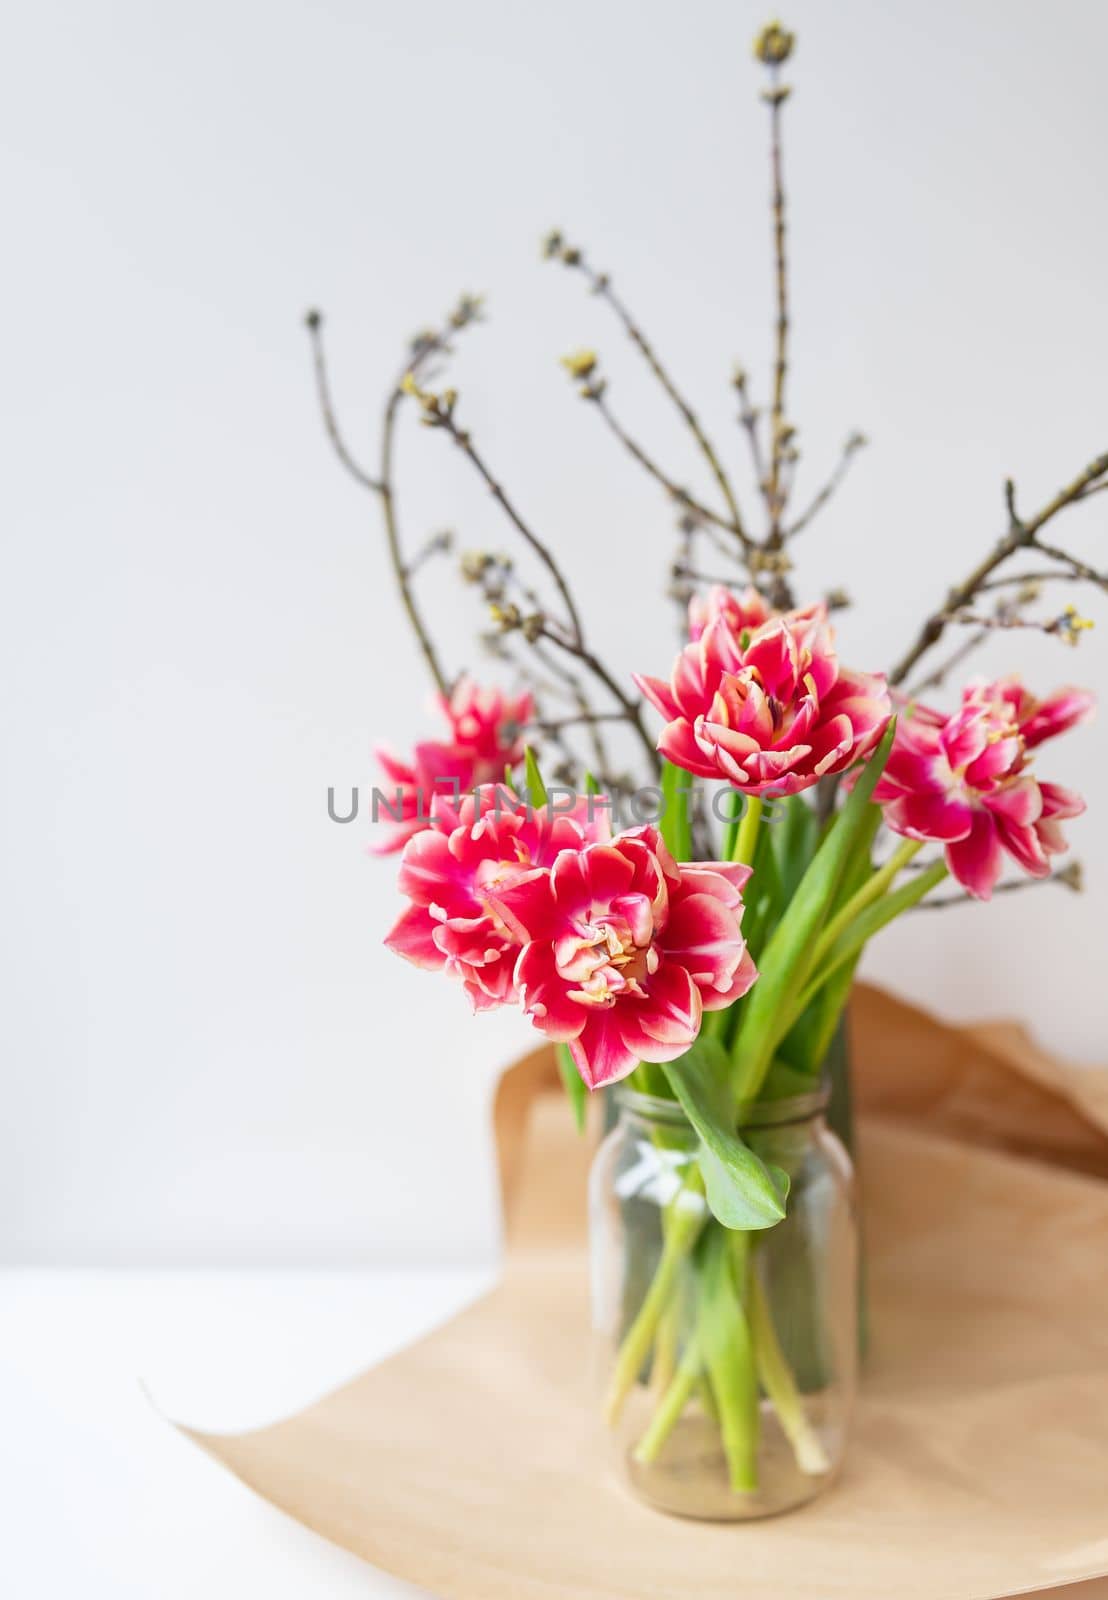 A beautiful spring bouquet of tulips stands in a vase along with spring branches. Surprise concept, birthday. Vertical photo, place for an inscription